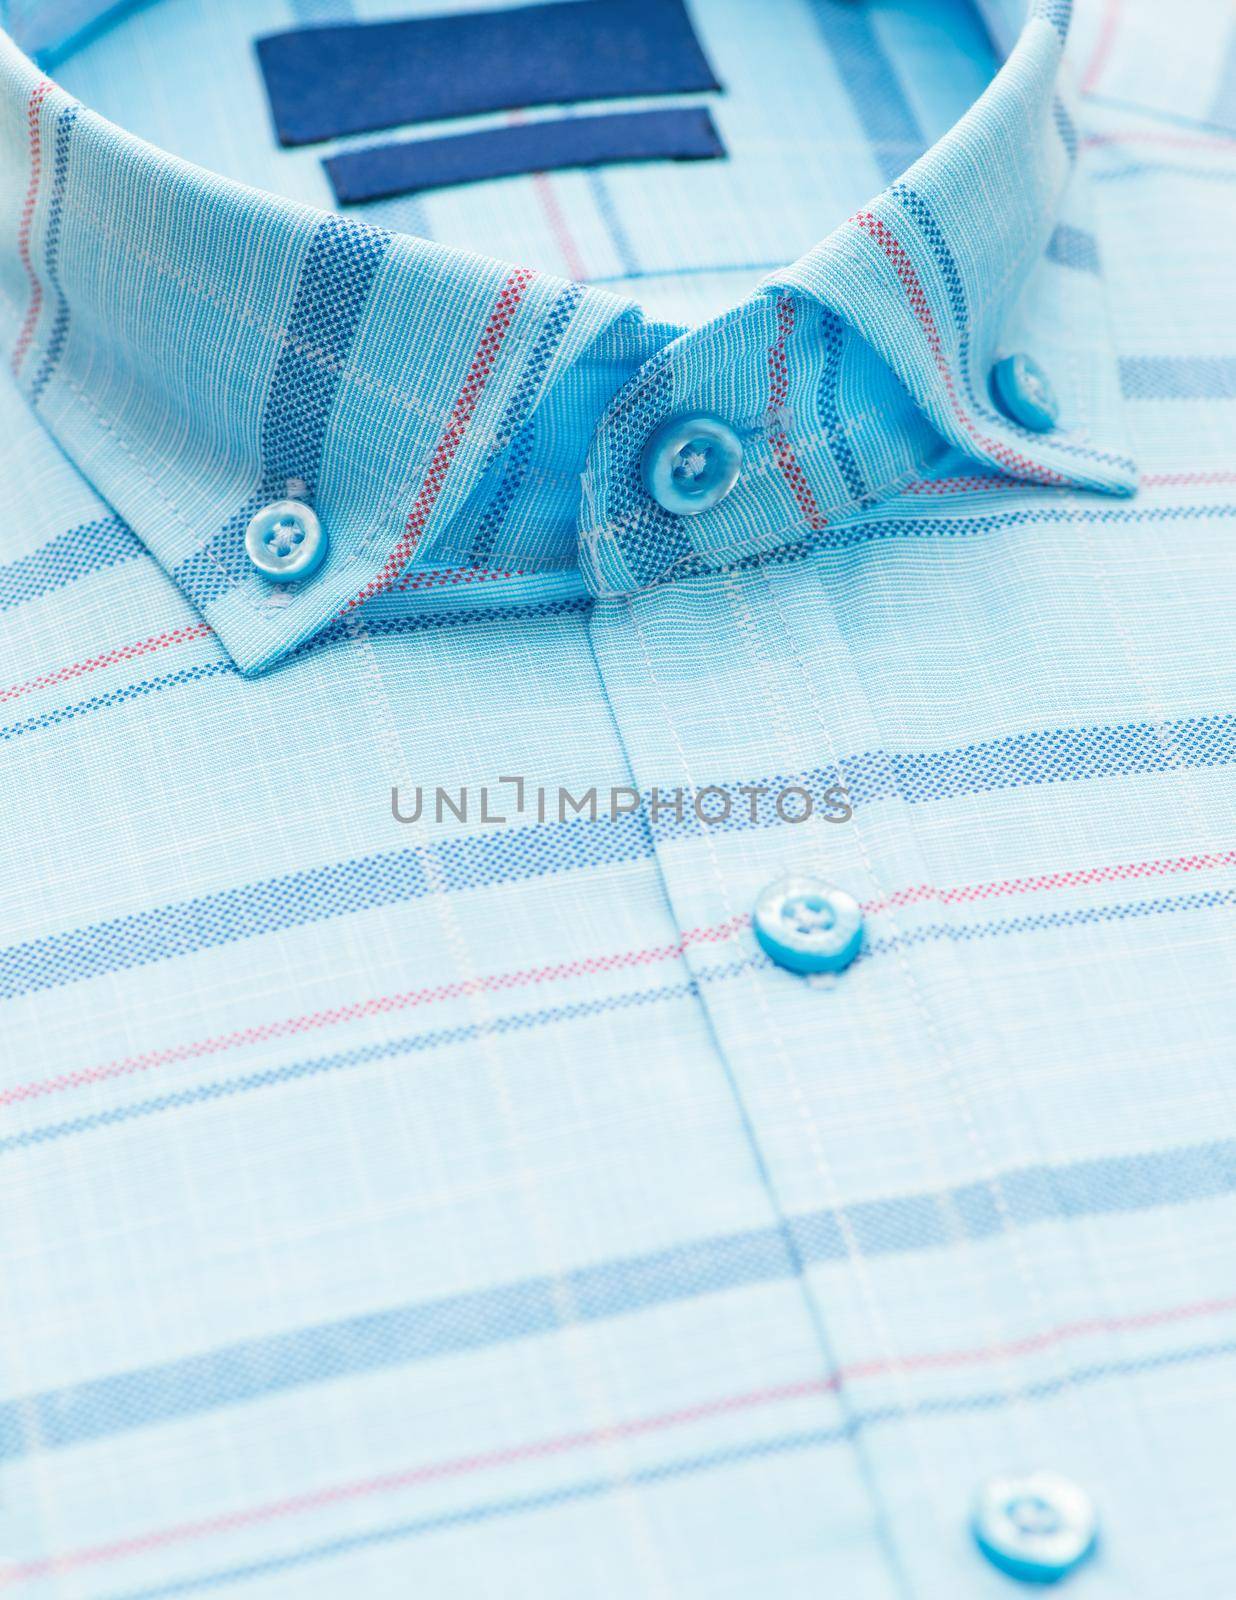 striped shirt with a focus on the collar and button, close-up